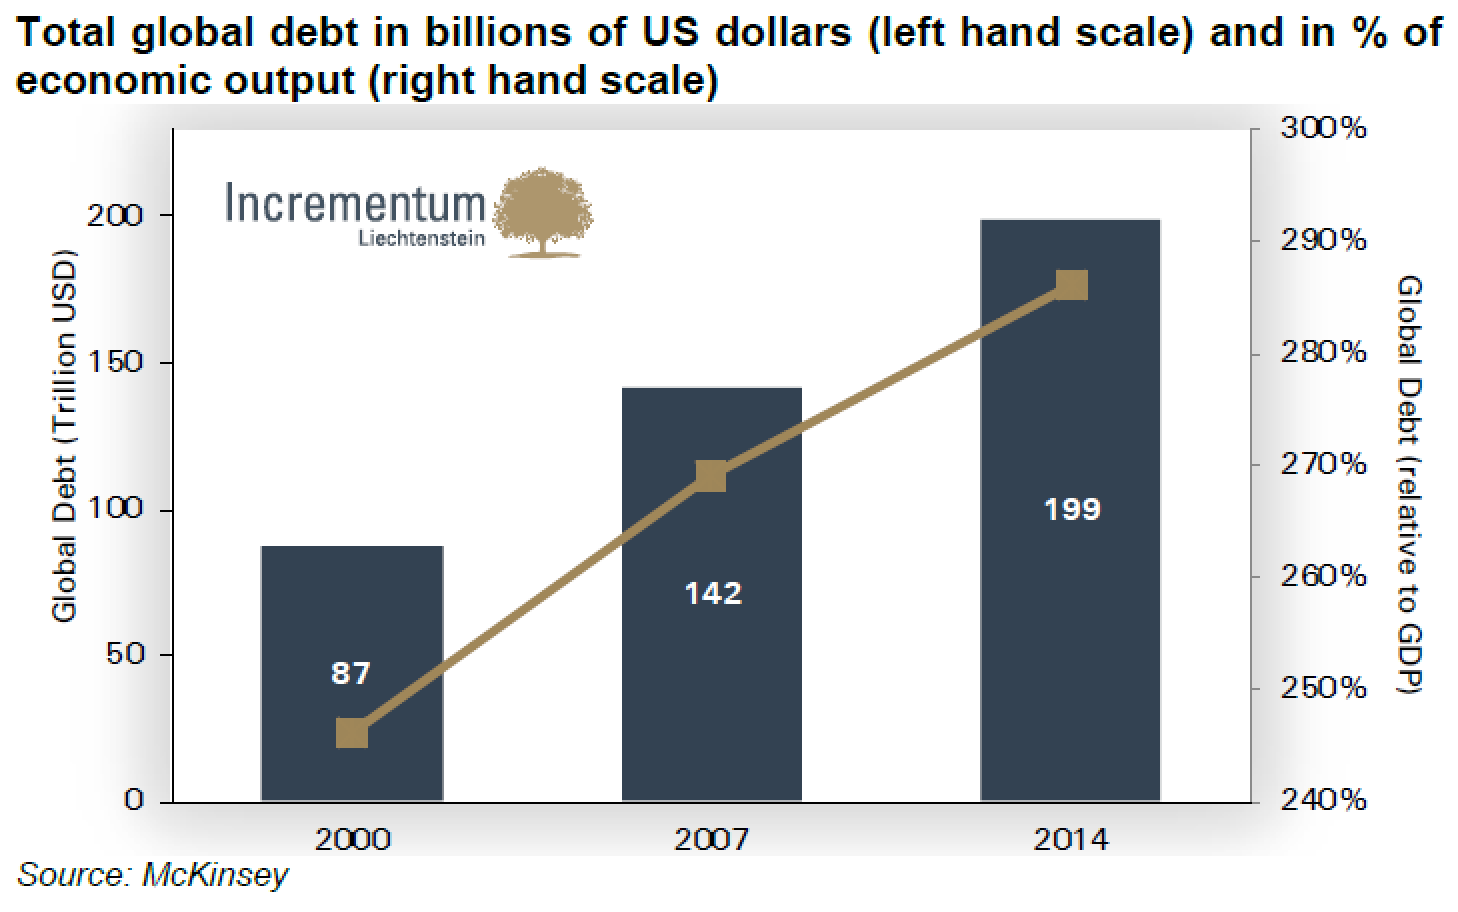 Total global debt in billions of US dollars and in percentage of economic output